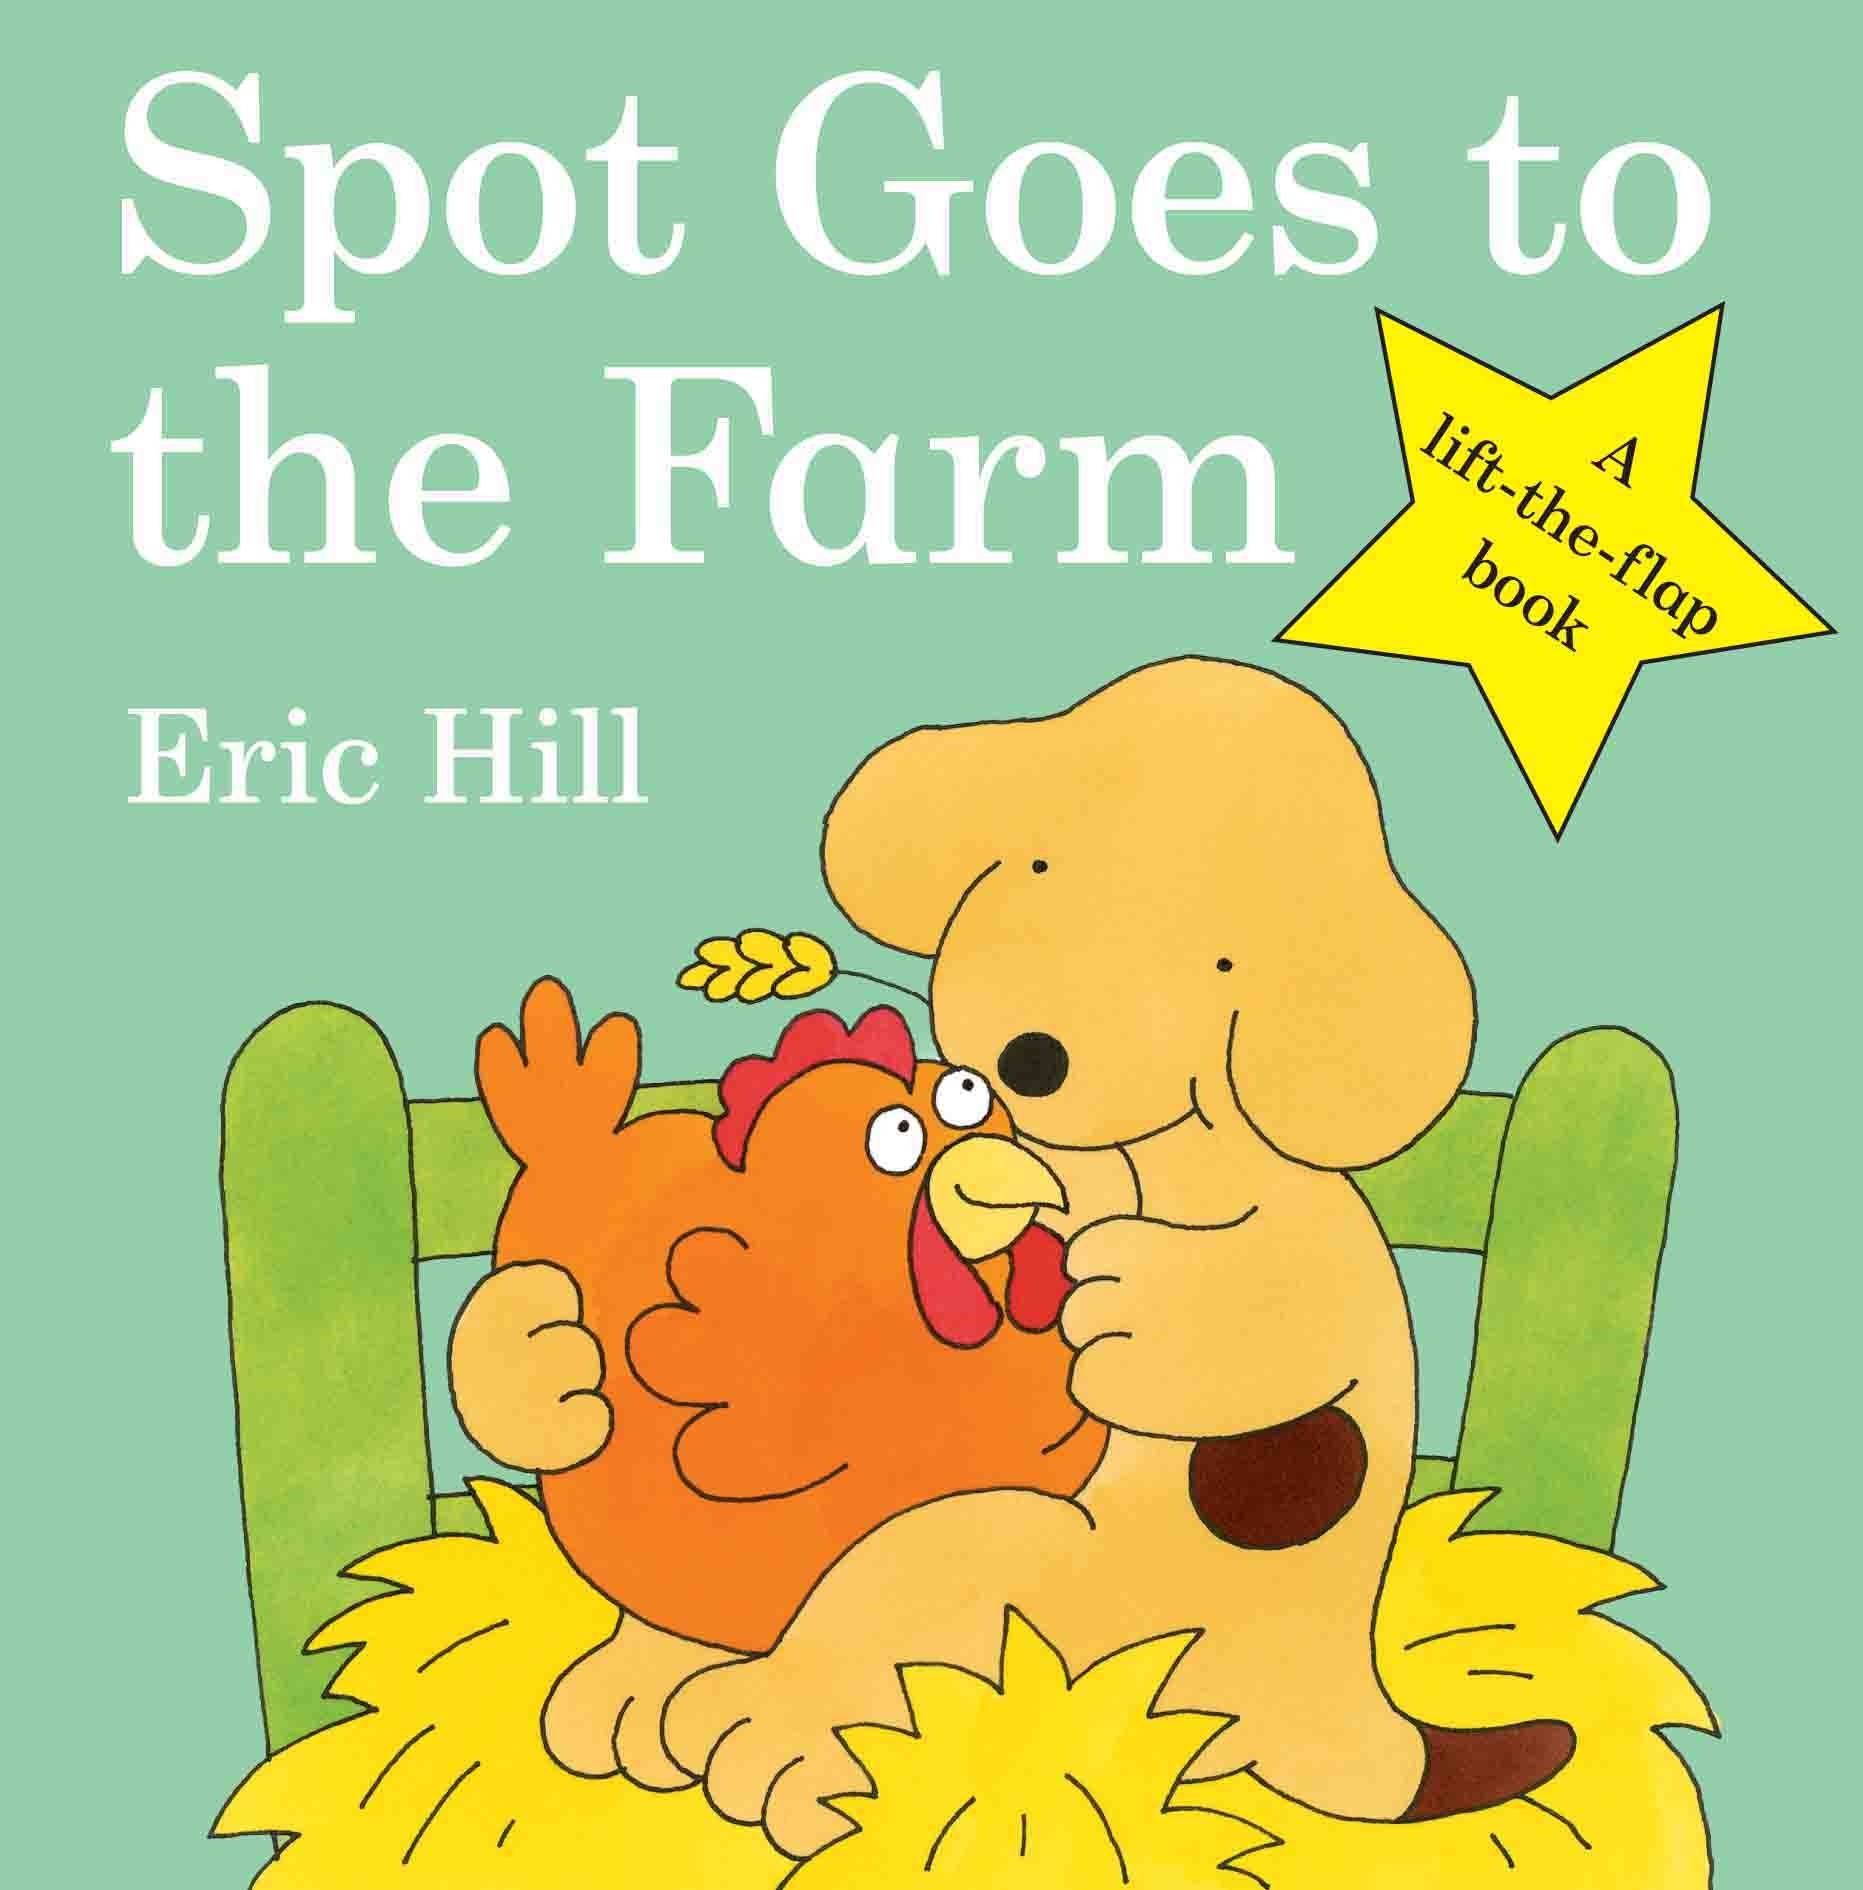 Spot Goes To The Farm by Eric Hill - Penguin Books Australia